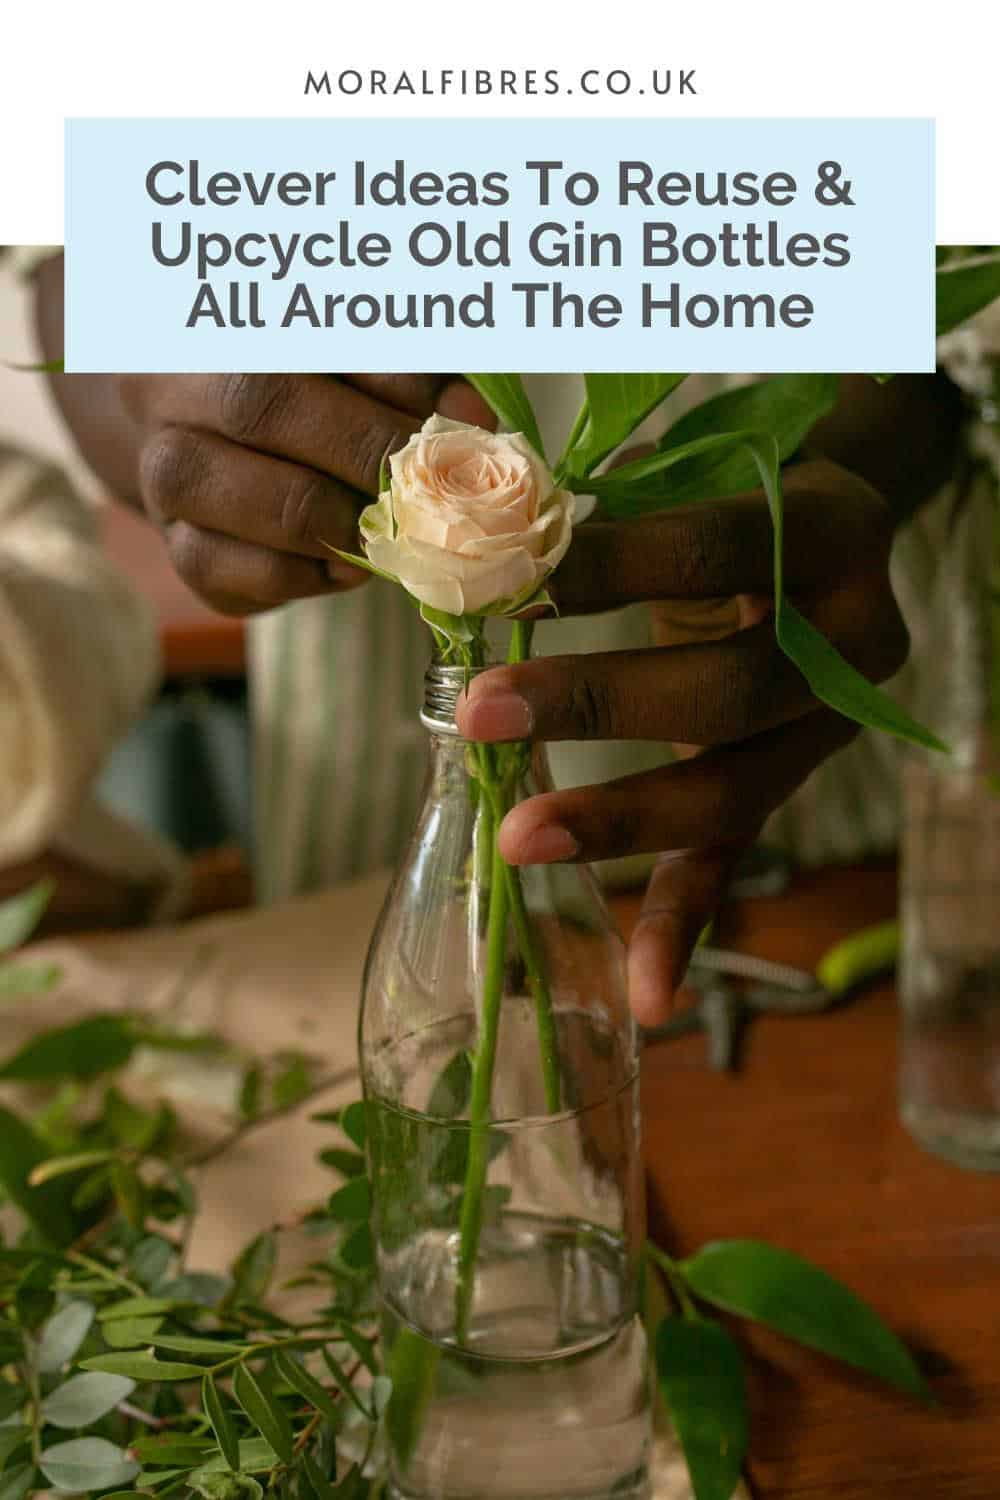 Person using an old bottle as a vase for a cream rose and foliage, with a blue text box that reads clever ideas to reuse and upcycle old gin bottles.